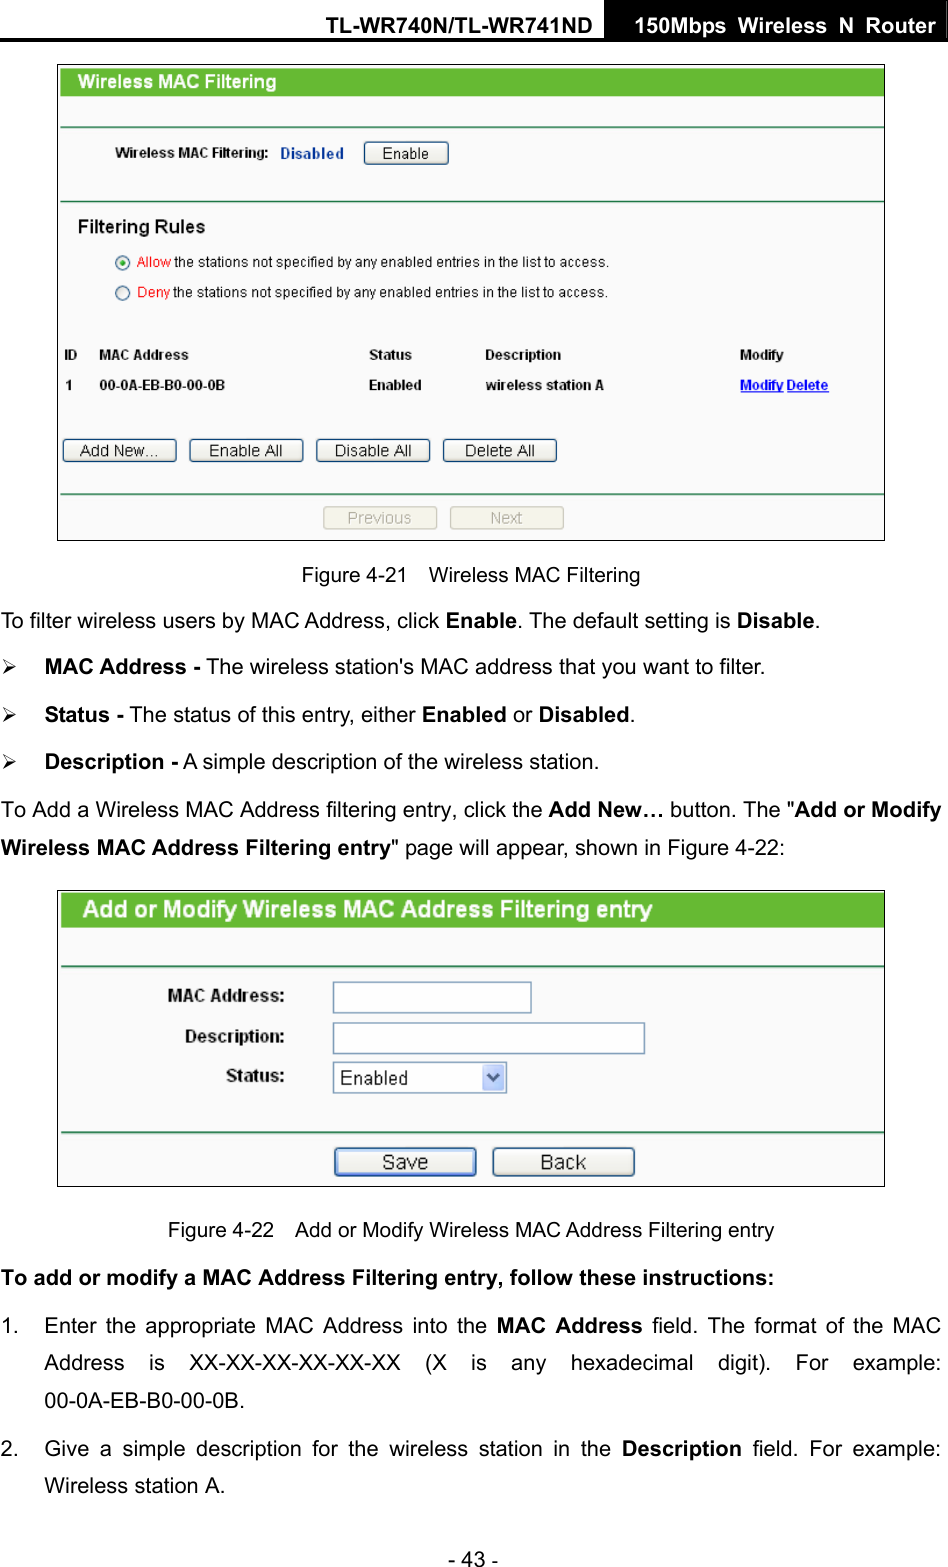 TL-WR740N/TL-WR741ND 150Mbps Wireless N Router - 43 -  Figure 4-21    Wireless MAC Filtering To filter wireless users by MAC Address, click Enable. The default setting is Disable. ¾ MAC Address - The wireless station&apos;s MAC address that you want to filter.   ¾ Status - The status of this entry, either Enabled or Disabled. ¾ Description - A simple description of the wireless station.   To Add a Wireless MAC Address filtering entry, click the Add New… button. The &quot;Add or Modify Wireless MAC Address Filtering entry&quot; page will appear, shown in Figure 4-22:  Figure 4-22    Add or Modify Wireless MAC Address Filtering entry To add or modify a MAC Address Filtering entry, follow these instructions: 1.  Enter the appropriate MAC Address into the MAC Address field. The format of the MAC Address is XX-XX-XX-XX-XX-XX (X is any hexadecimal digit). For example: 00-0A-EB-B0-00-0B.  2.  Give a simple description for the wireless station in the Description field. For example: Wireless station A. 